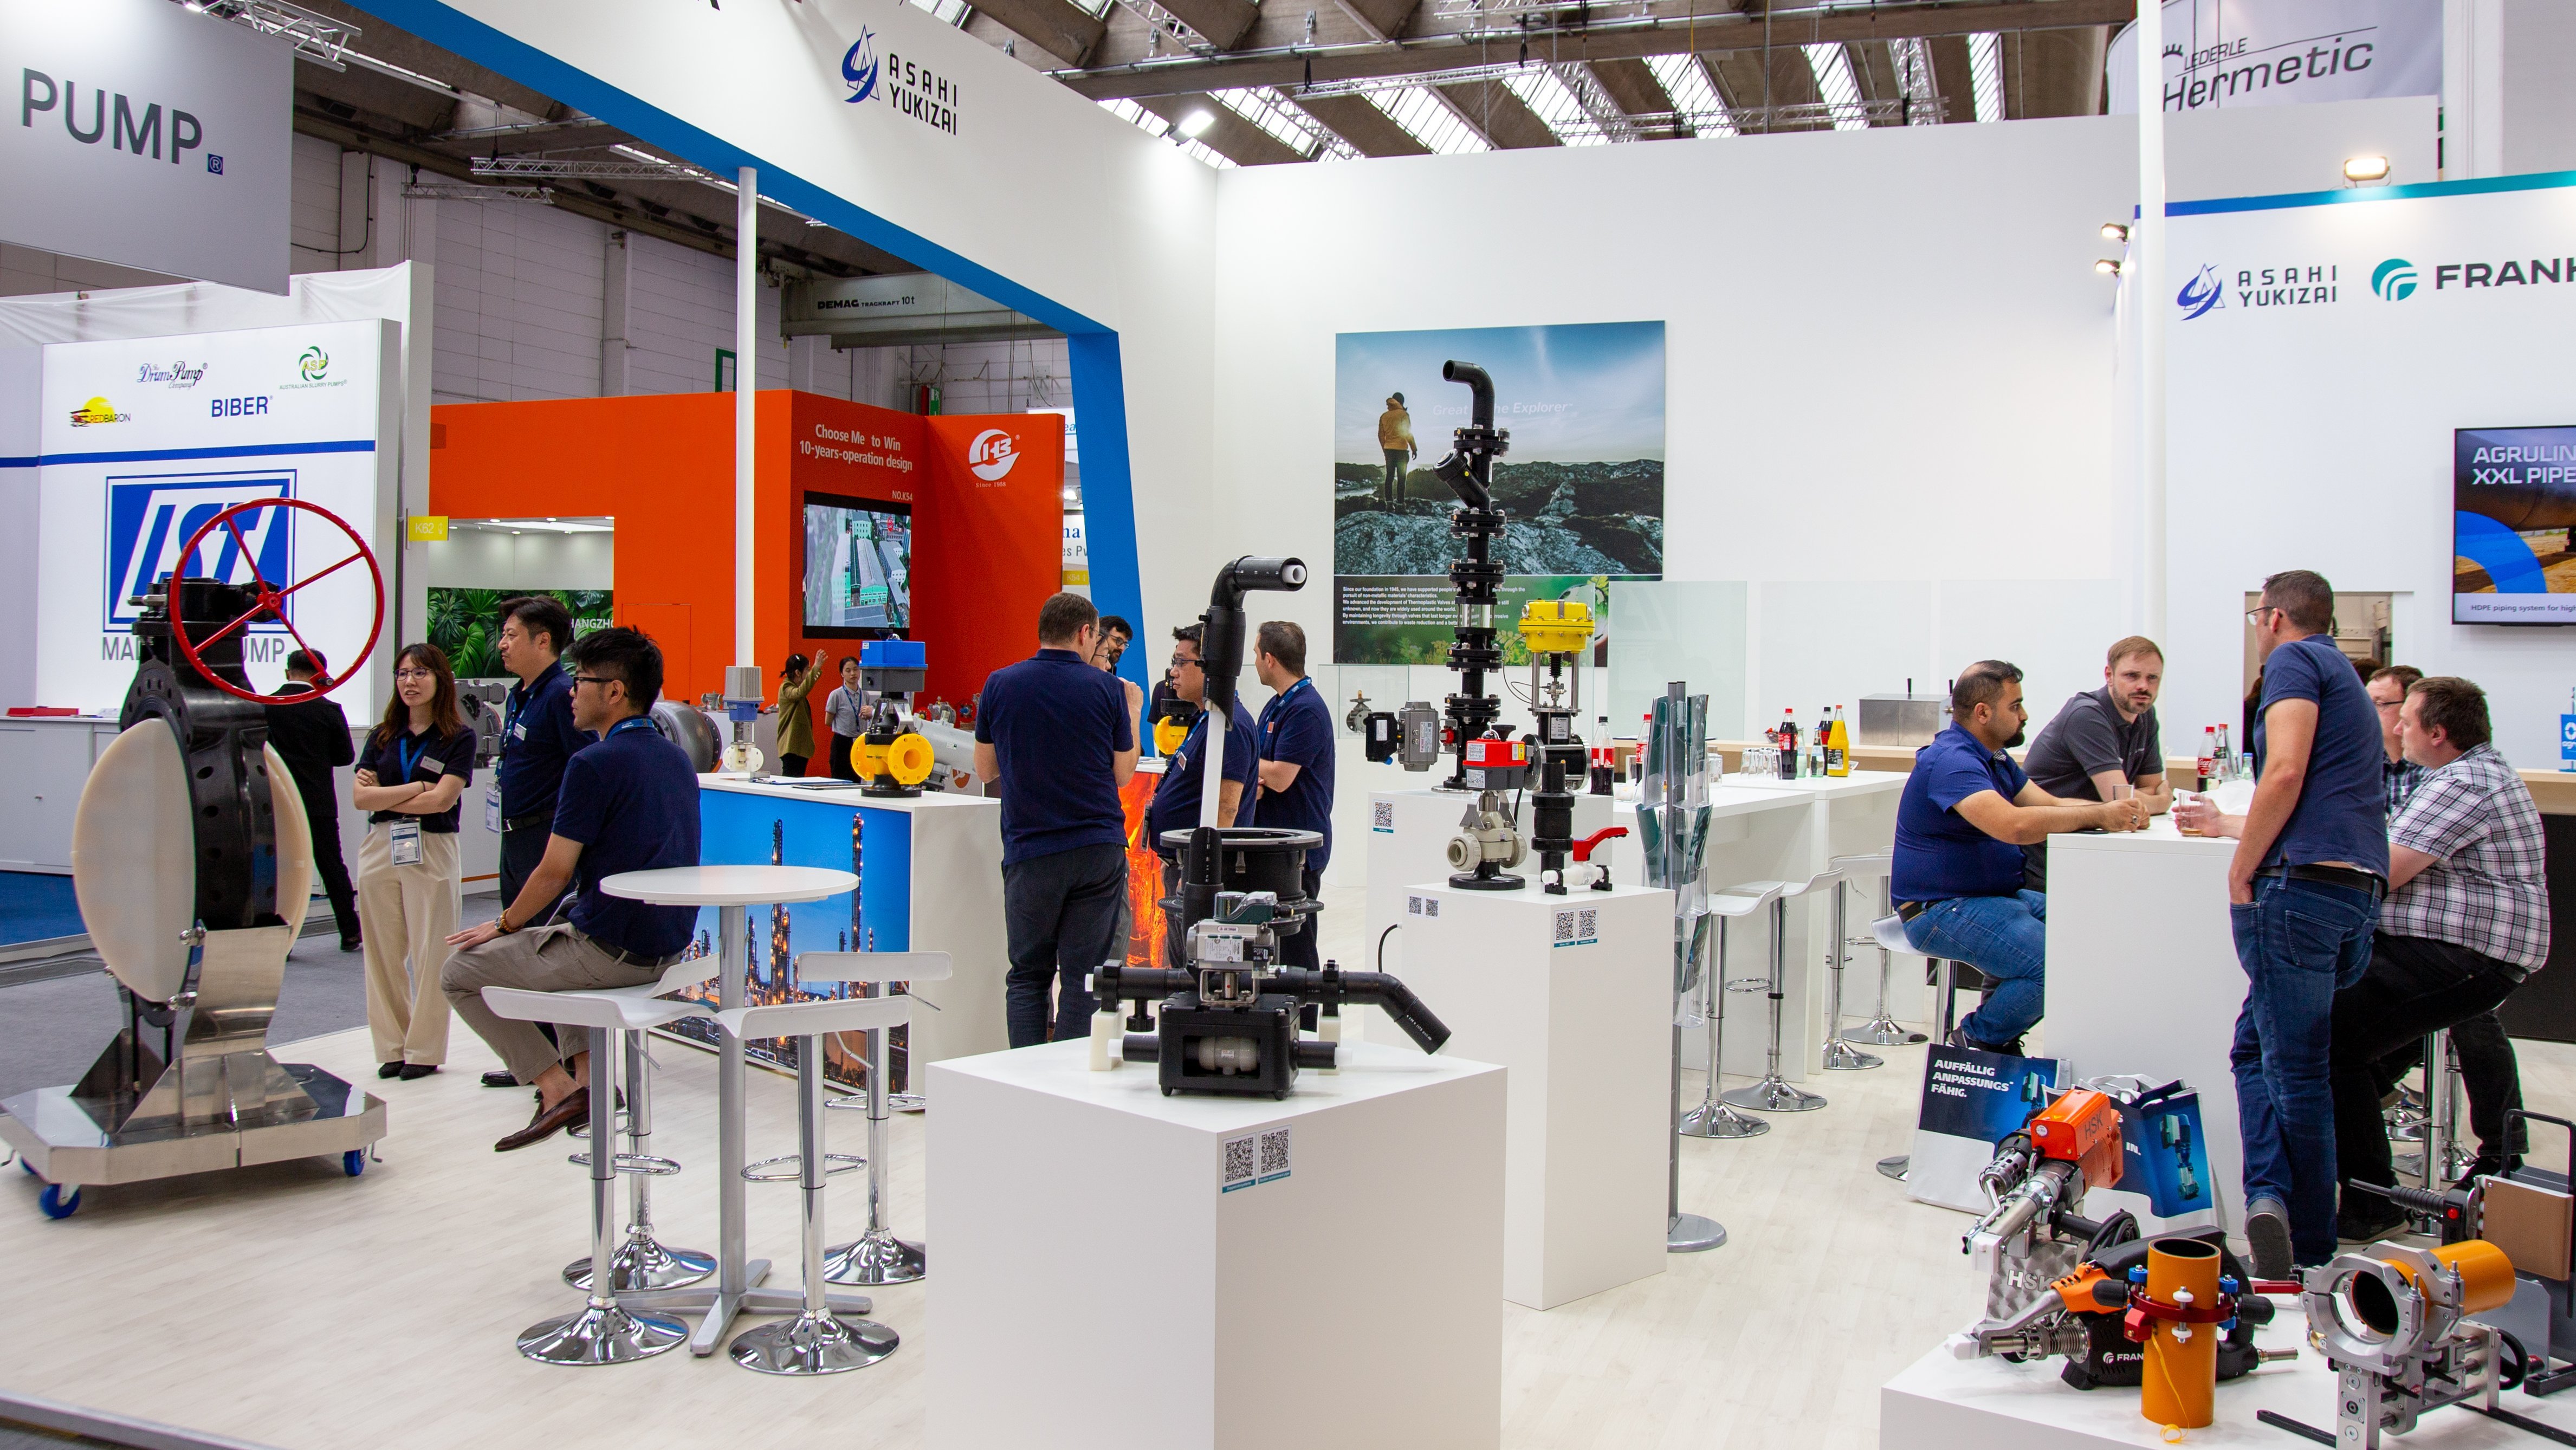 Achema, the leading international trade fair for the process industry